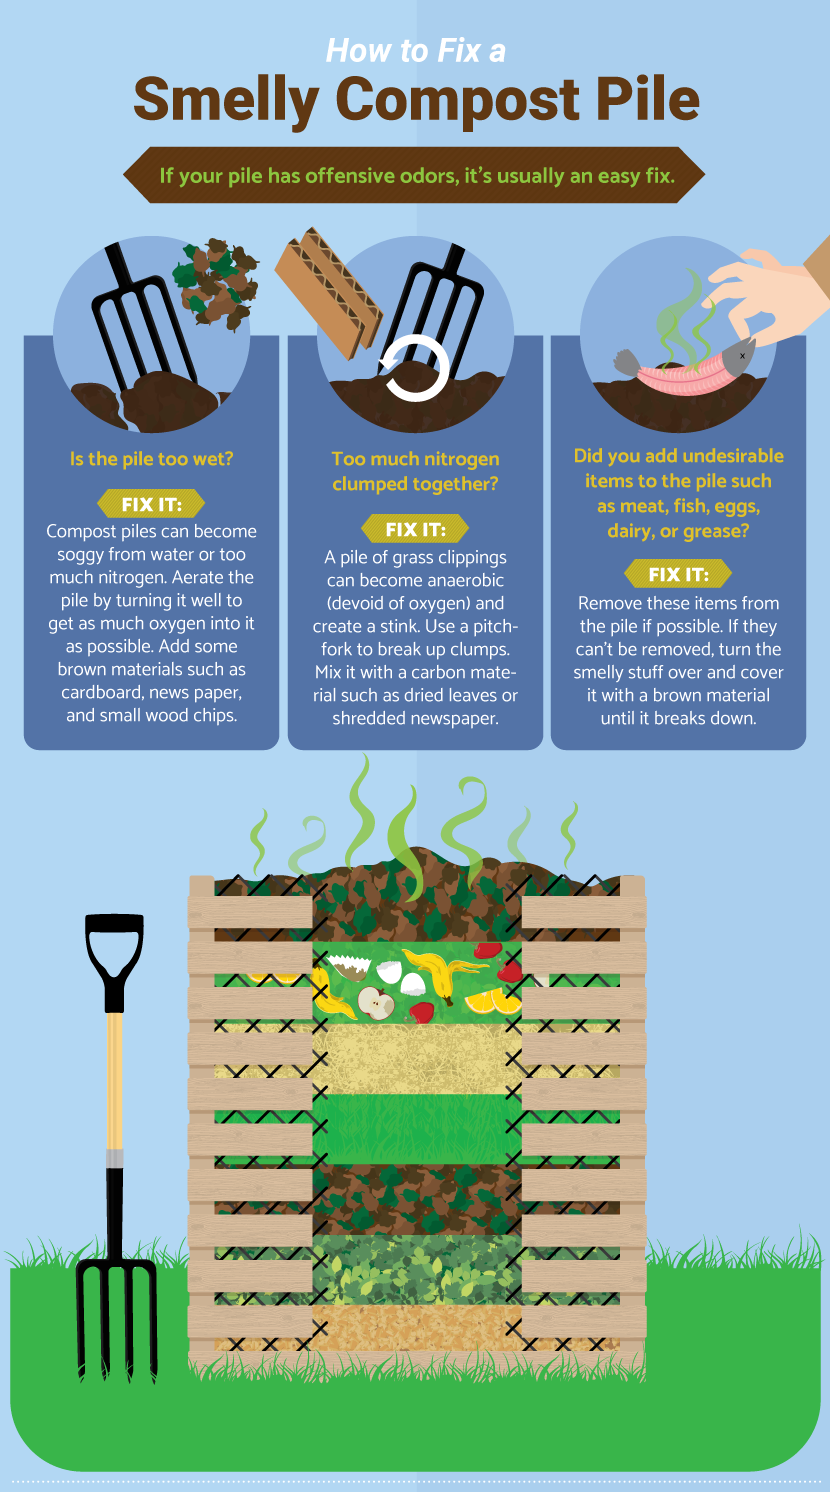 How to Fix a Smelly Compost Pile - Guide to Home Composting